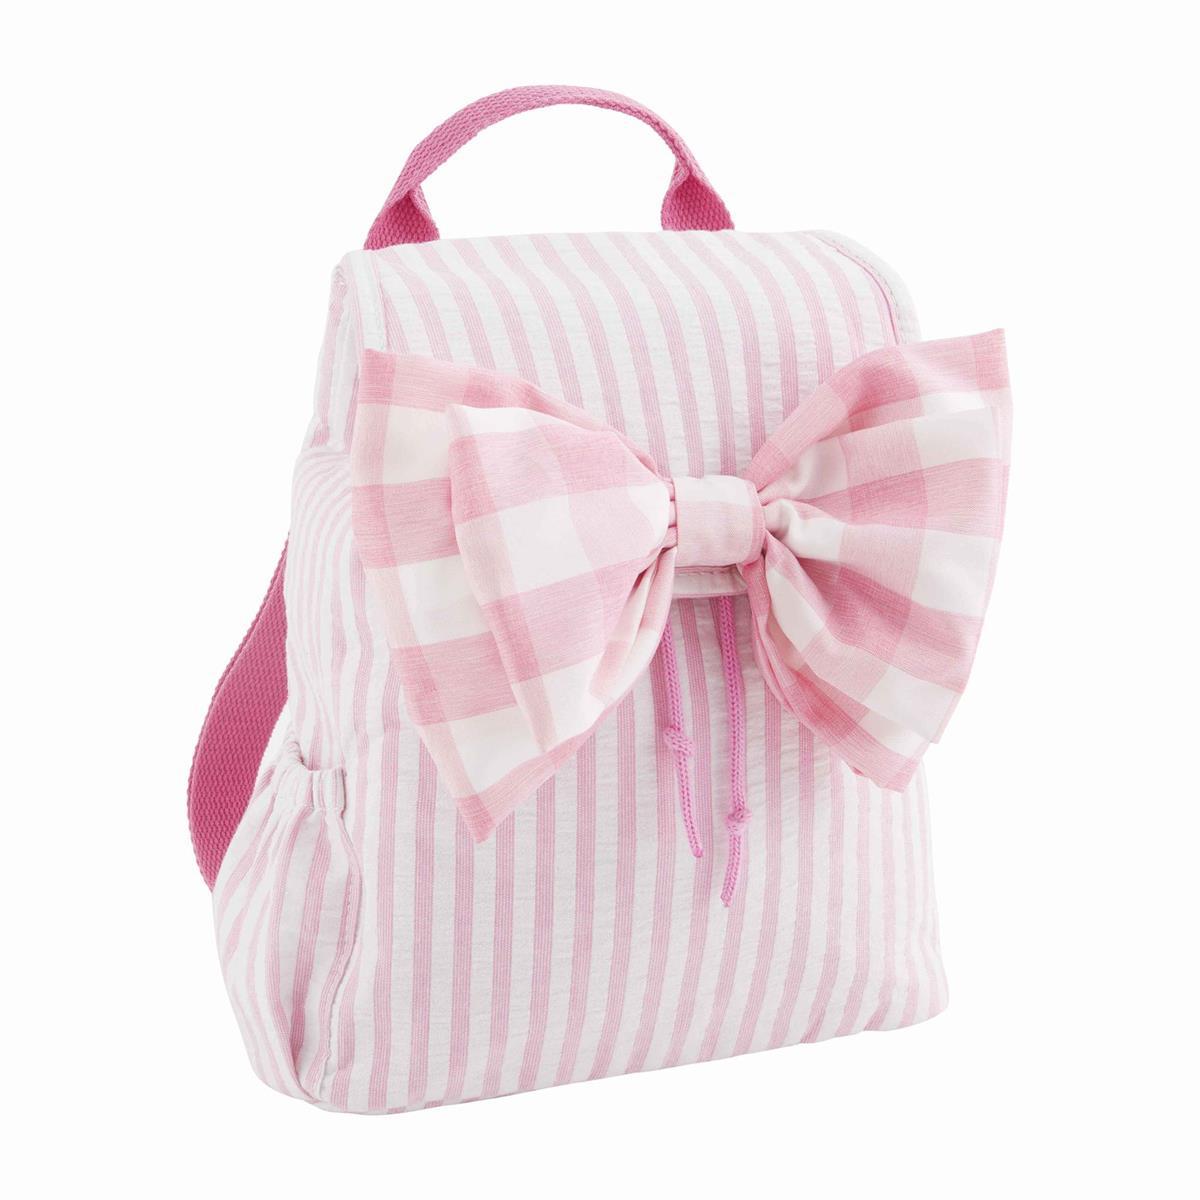 Mud Pie Bow Drawstring Backpack - BeautyOfASite - Central Illinois Gifts, Fashion & Beauty Boutique